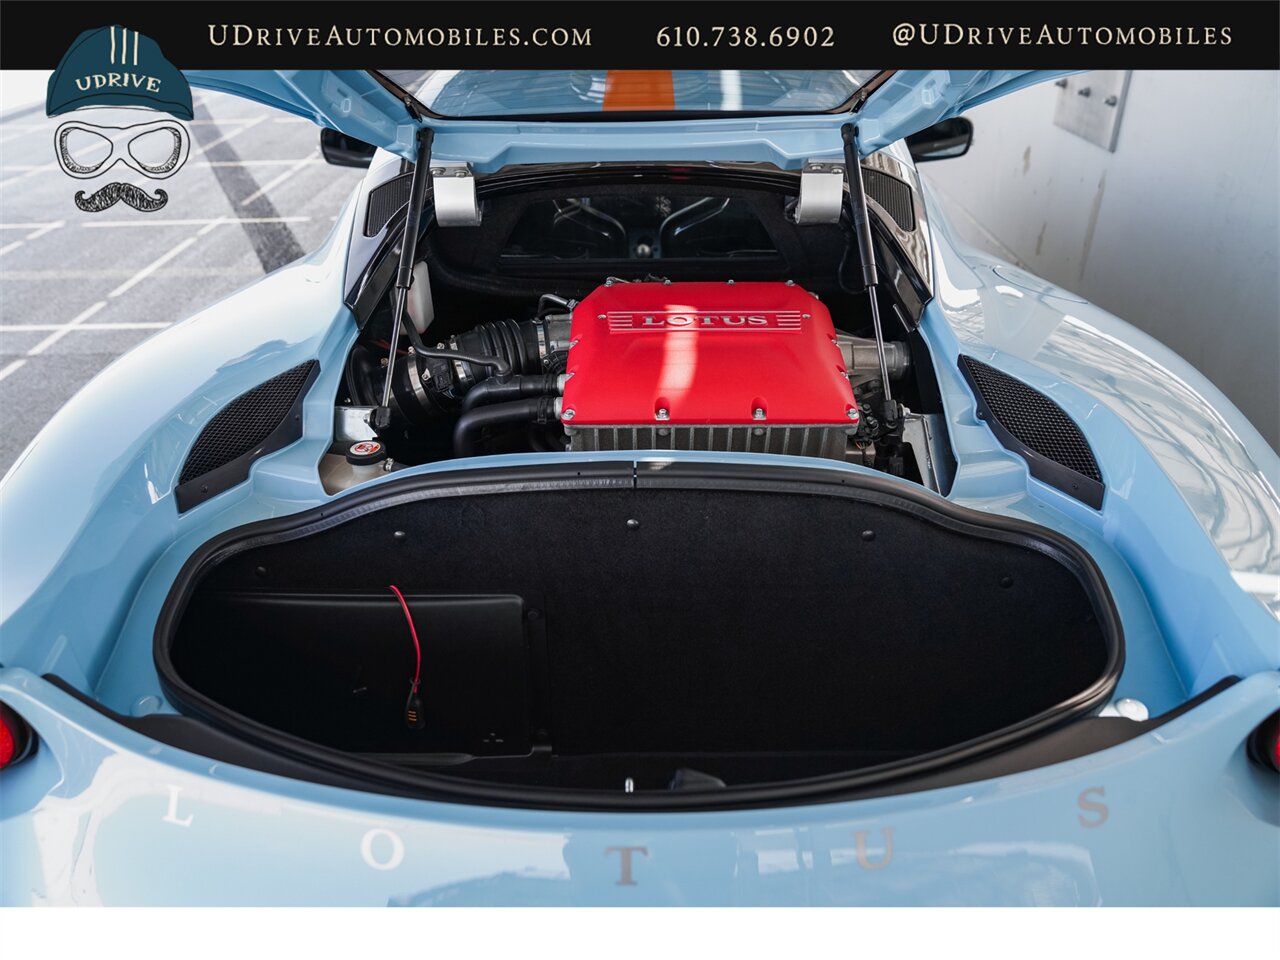 2020 Lotus Evora GT 2+2  6 Speed Manual Sky Blue Bespoke Stitching - Photo 52 - West Chester, PA 19382